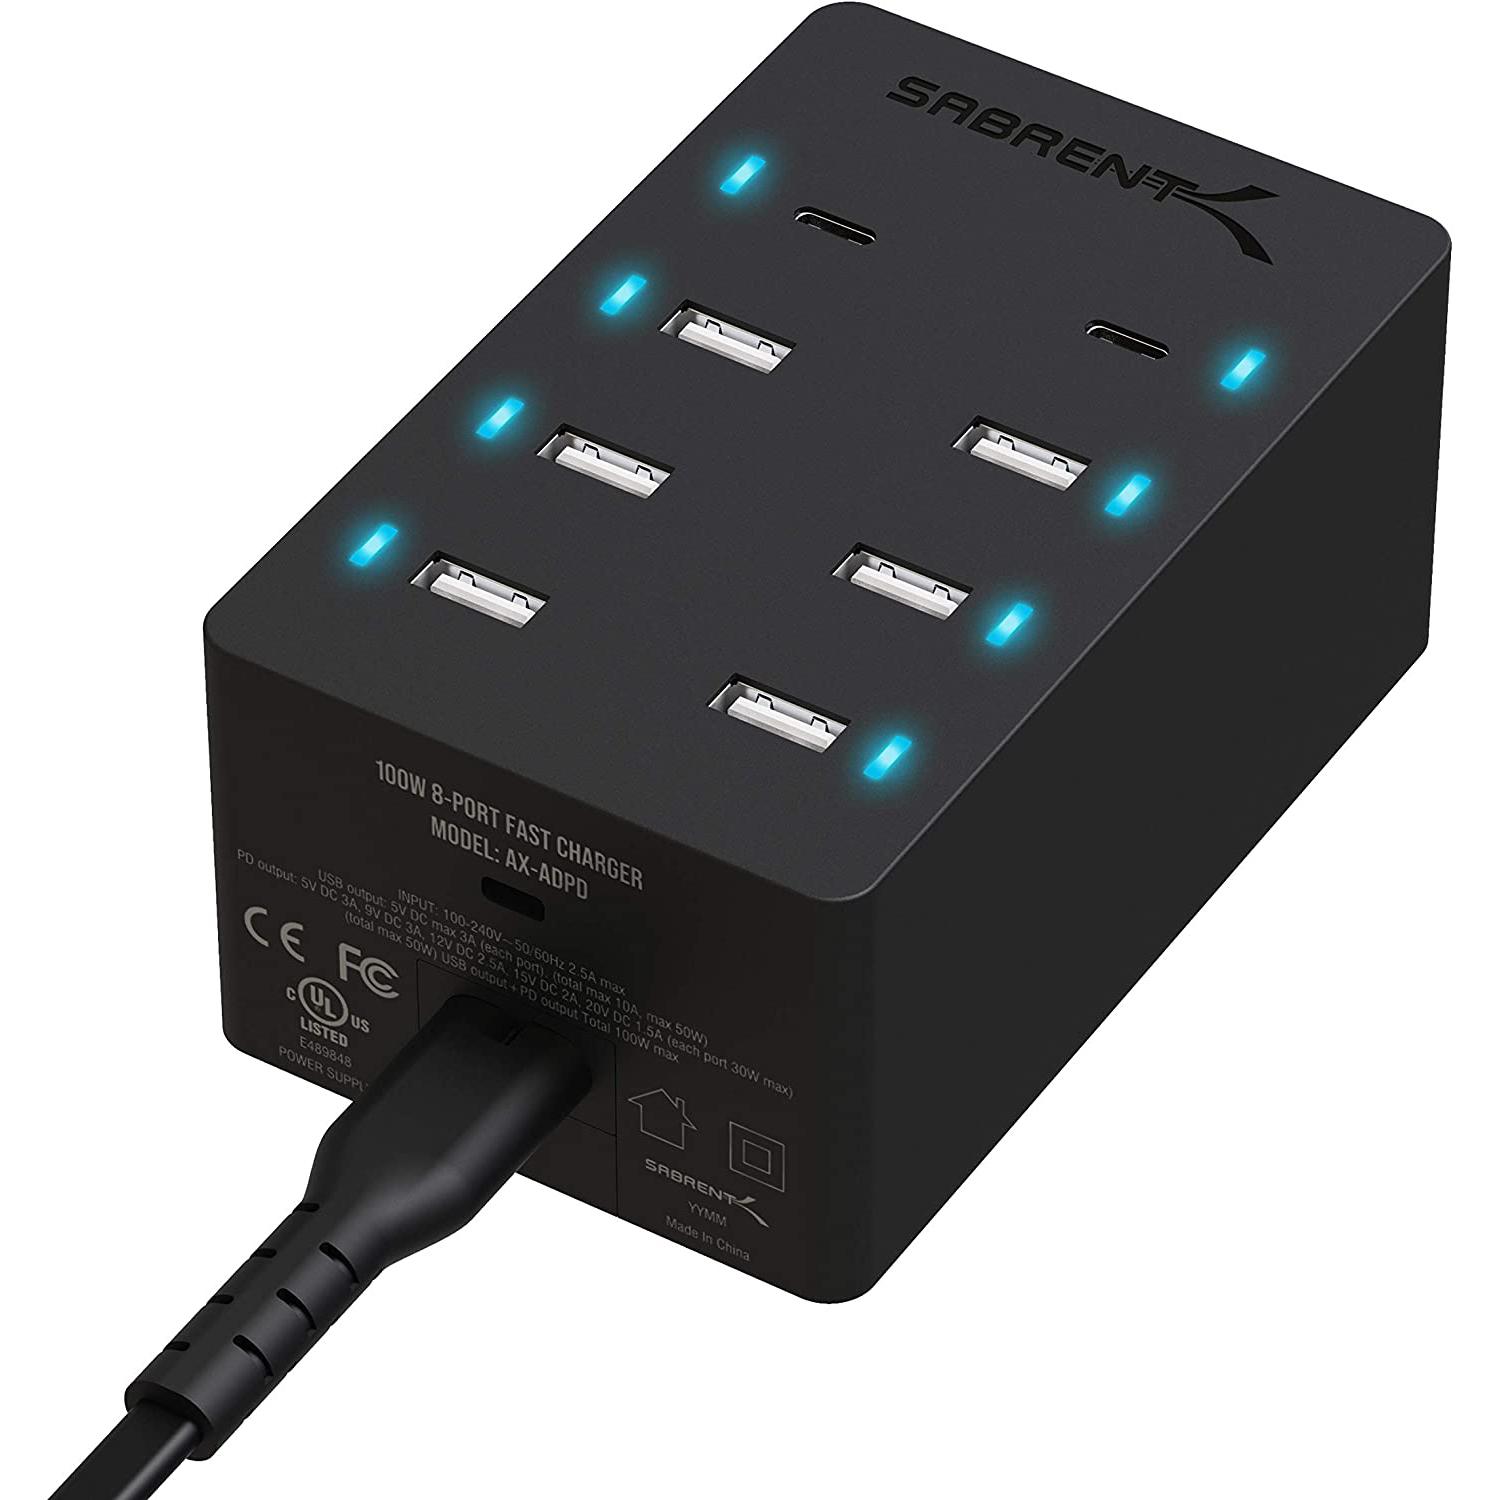 Sabrent 100W 8-Port Family Sized USB Rapid Charger for $29.99 Shipped